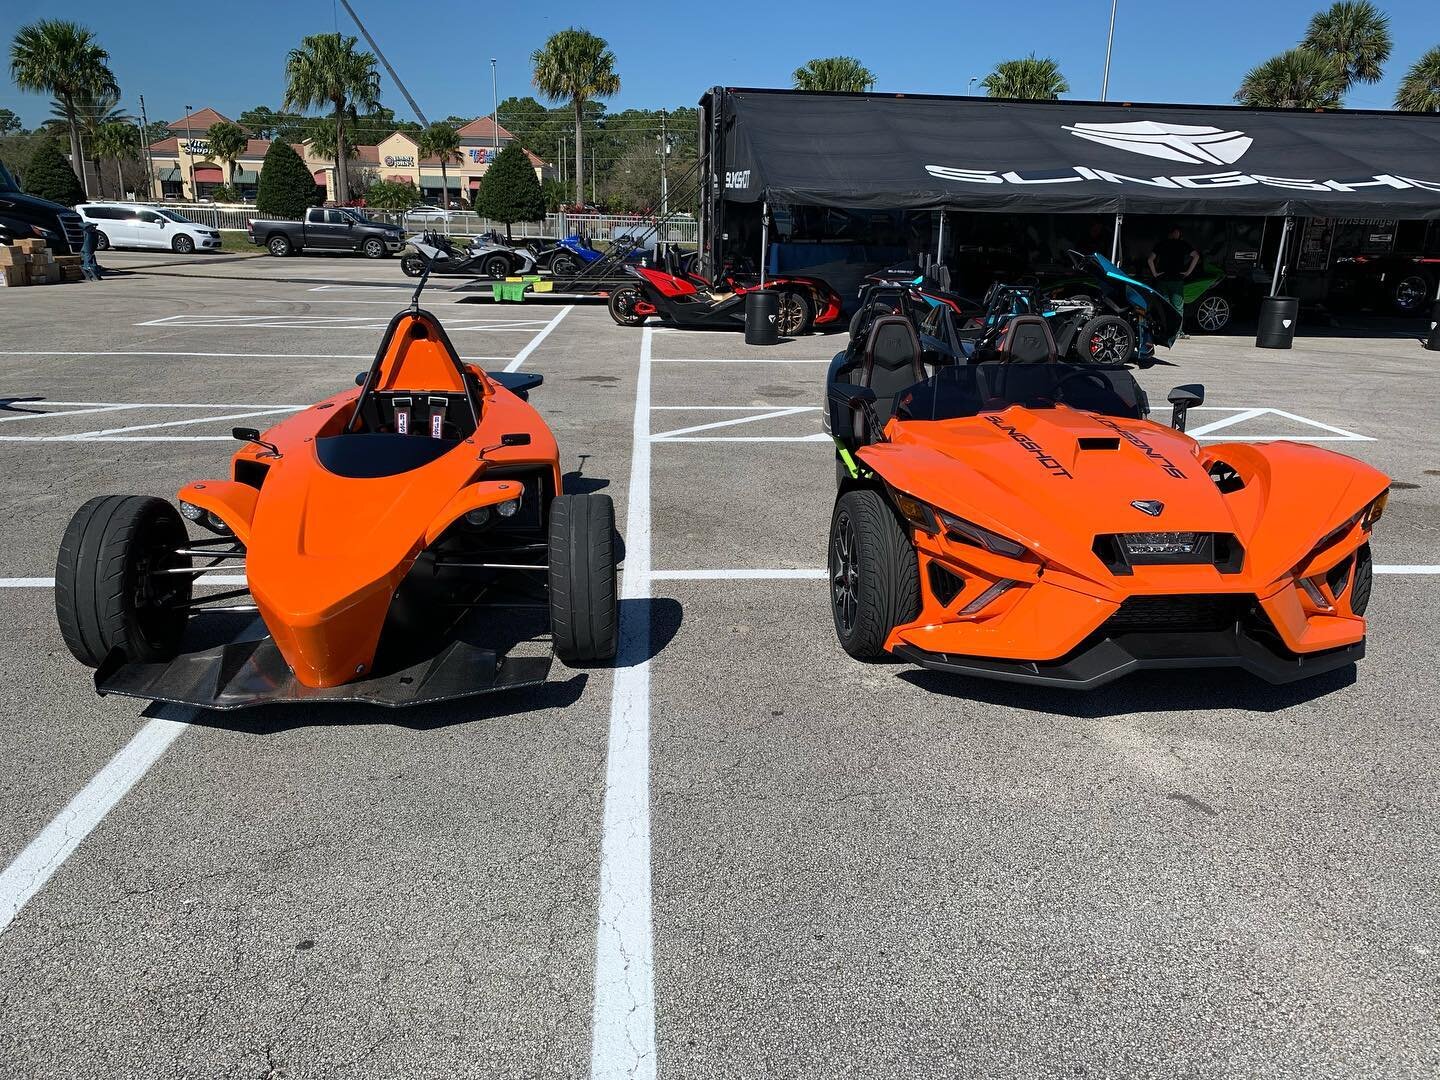 Bike week prep is well underway. We stopped by the @polarisslingshot booth @daytona international speedway for a photo-op and chat. Here&rsquo;s a quick photo compare of their latest machine and the Corso California RT. 
&bull;
#corsoconcepts #polari